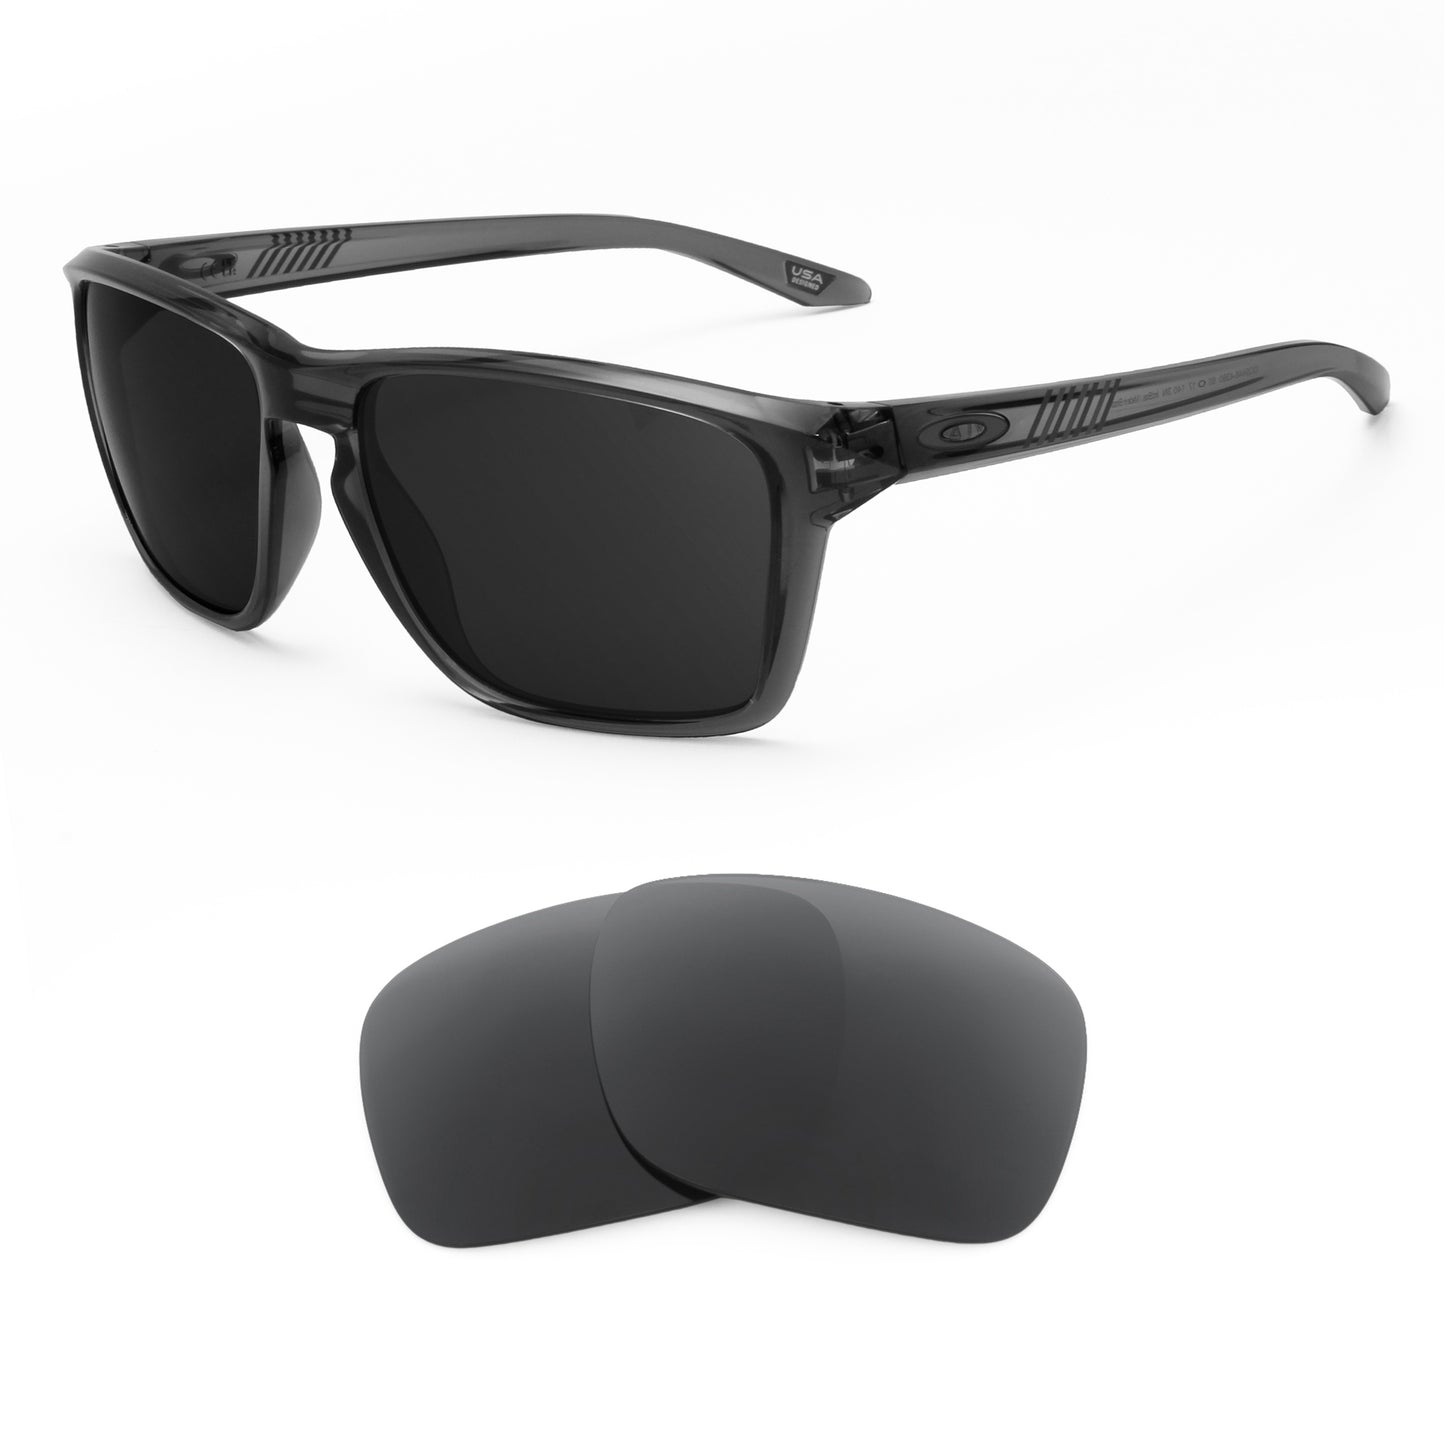 Oakley Sylas XL sunglasses with replacement lenses